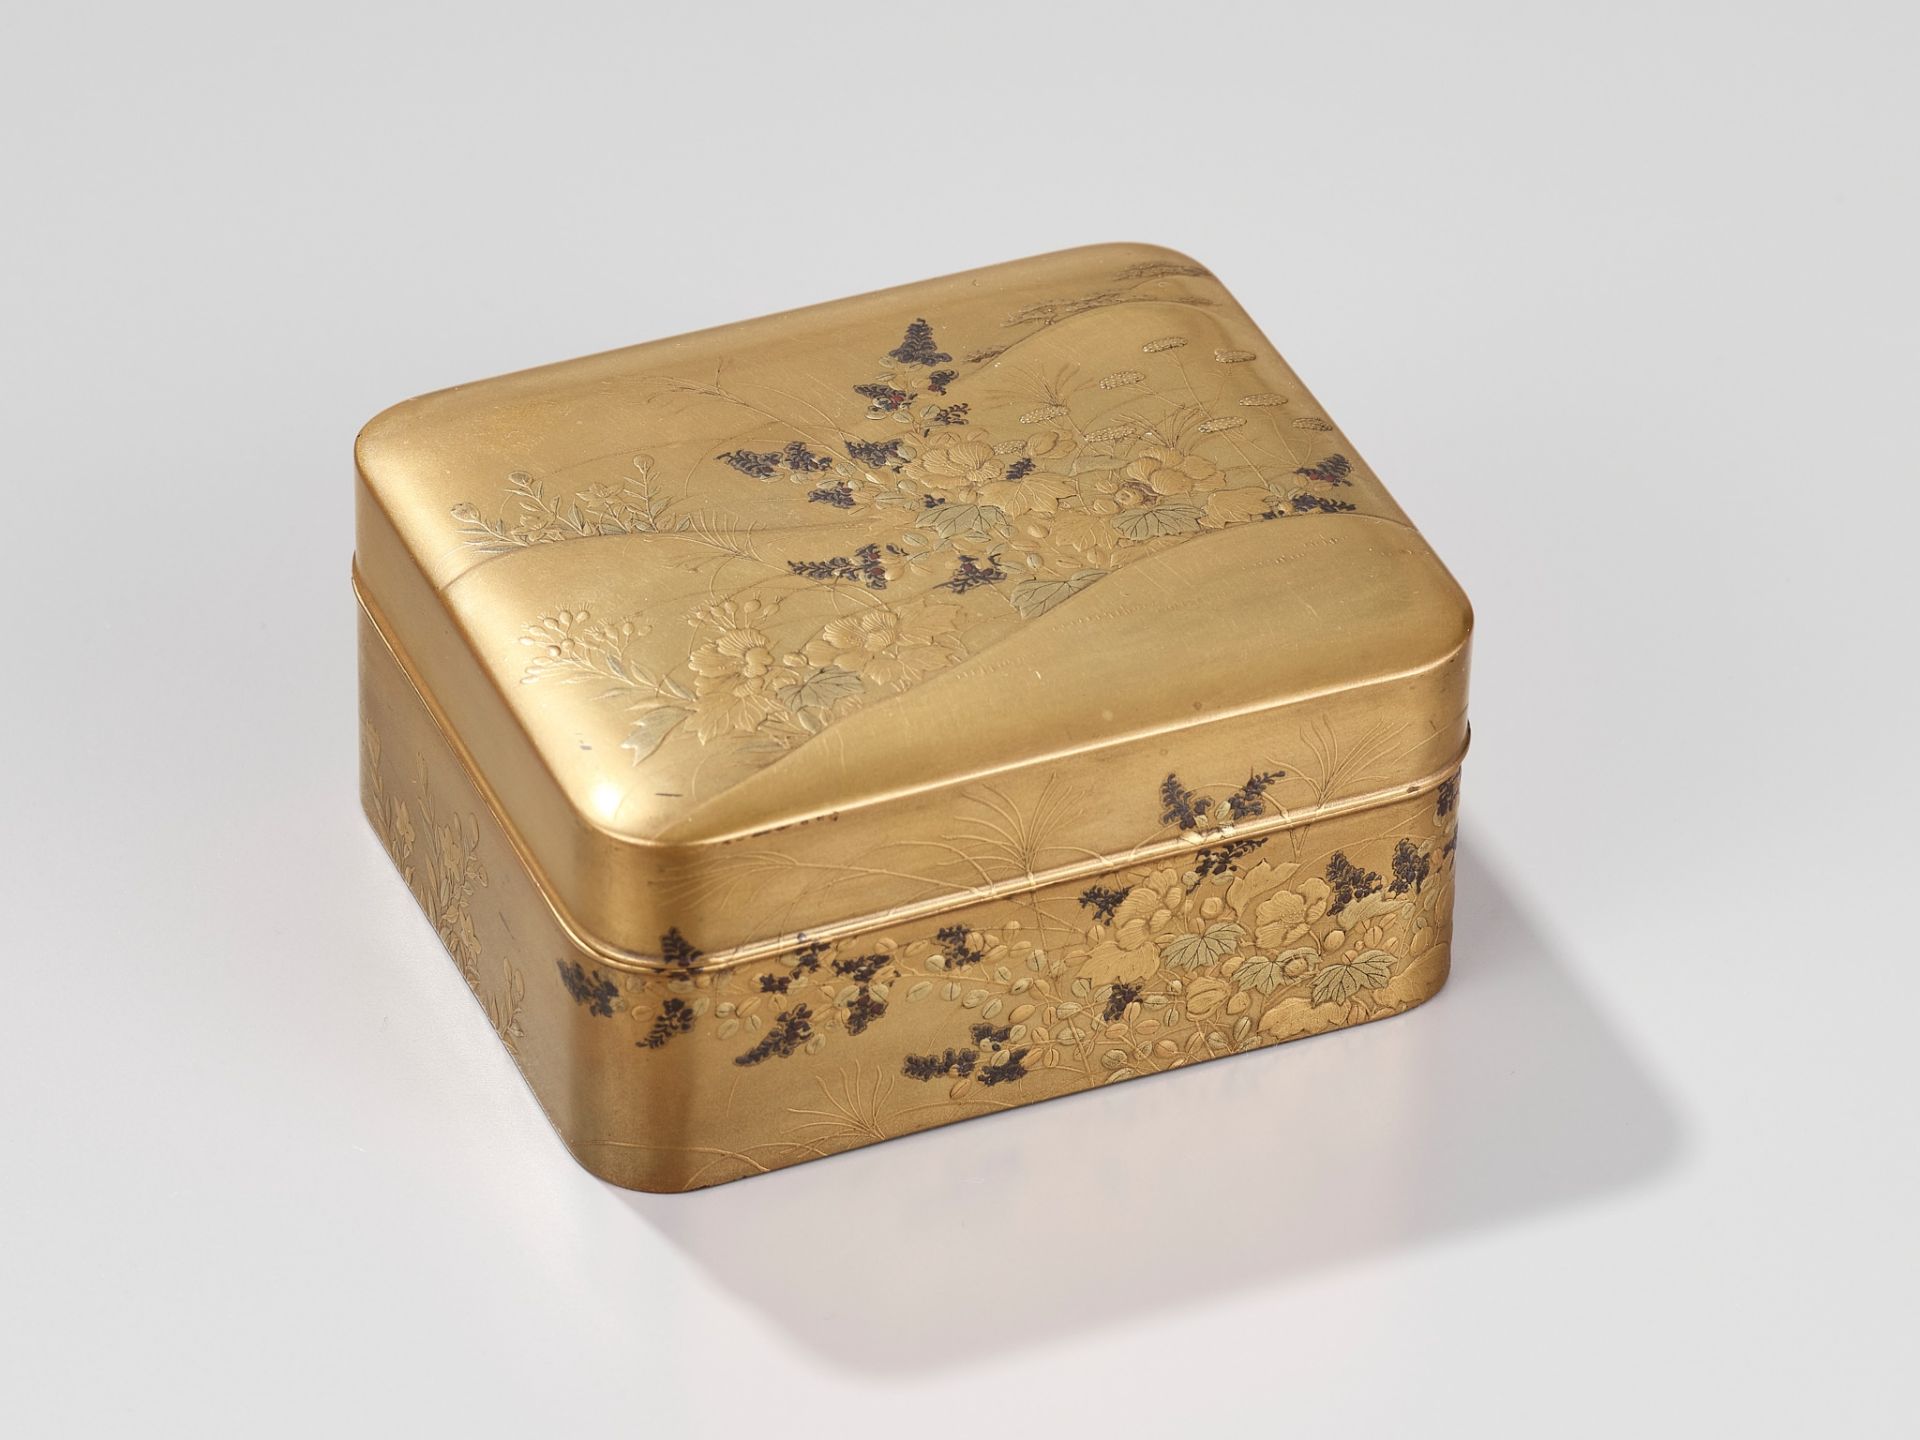 A LACQUER KOBAKO (SMALL BOX) AND COVER WITH AUTUMN FLOWERS